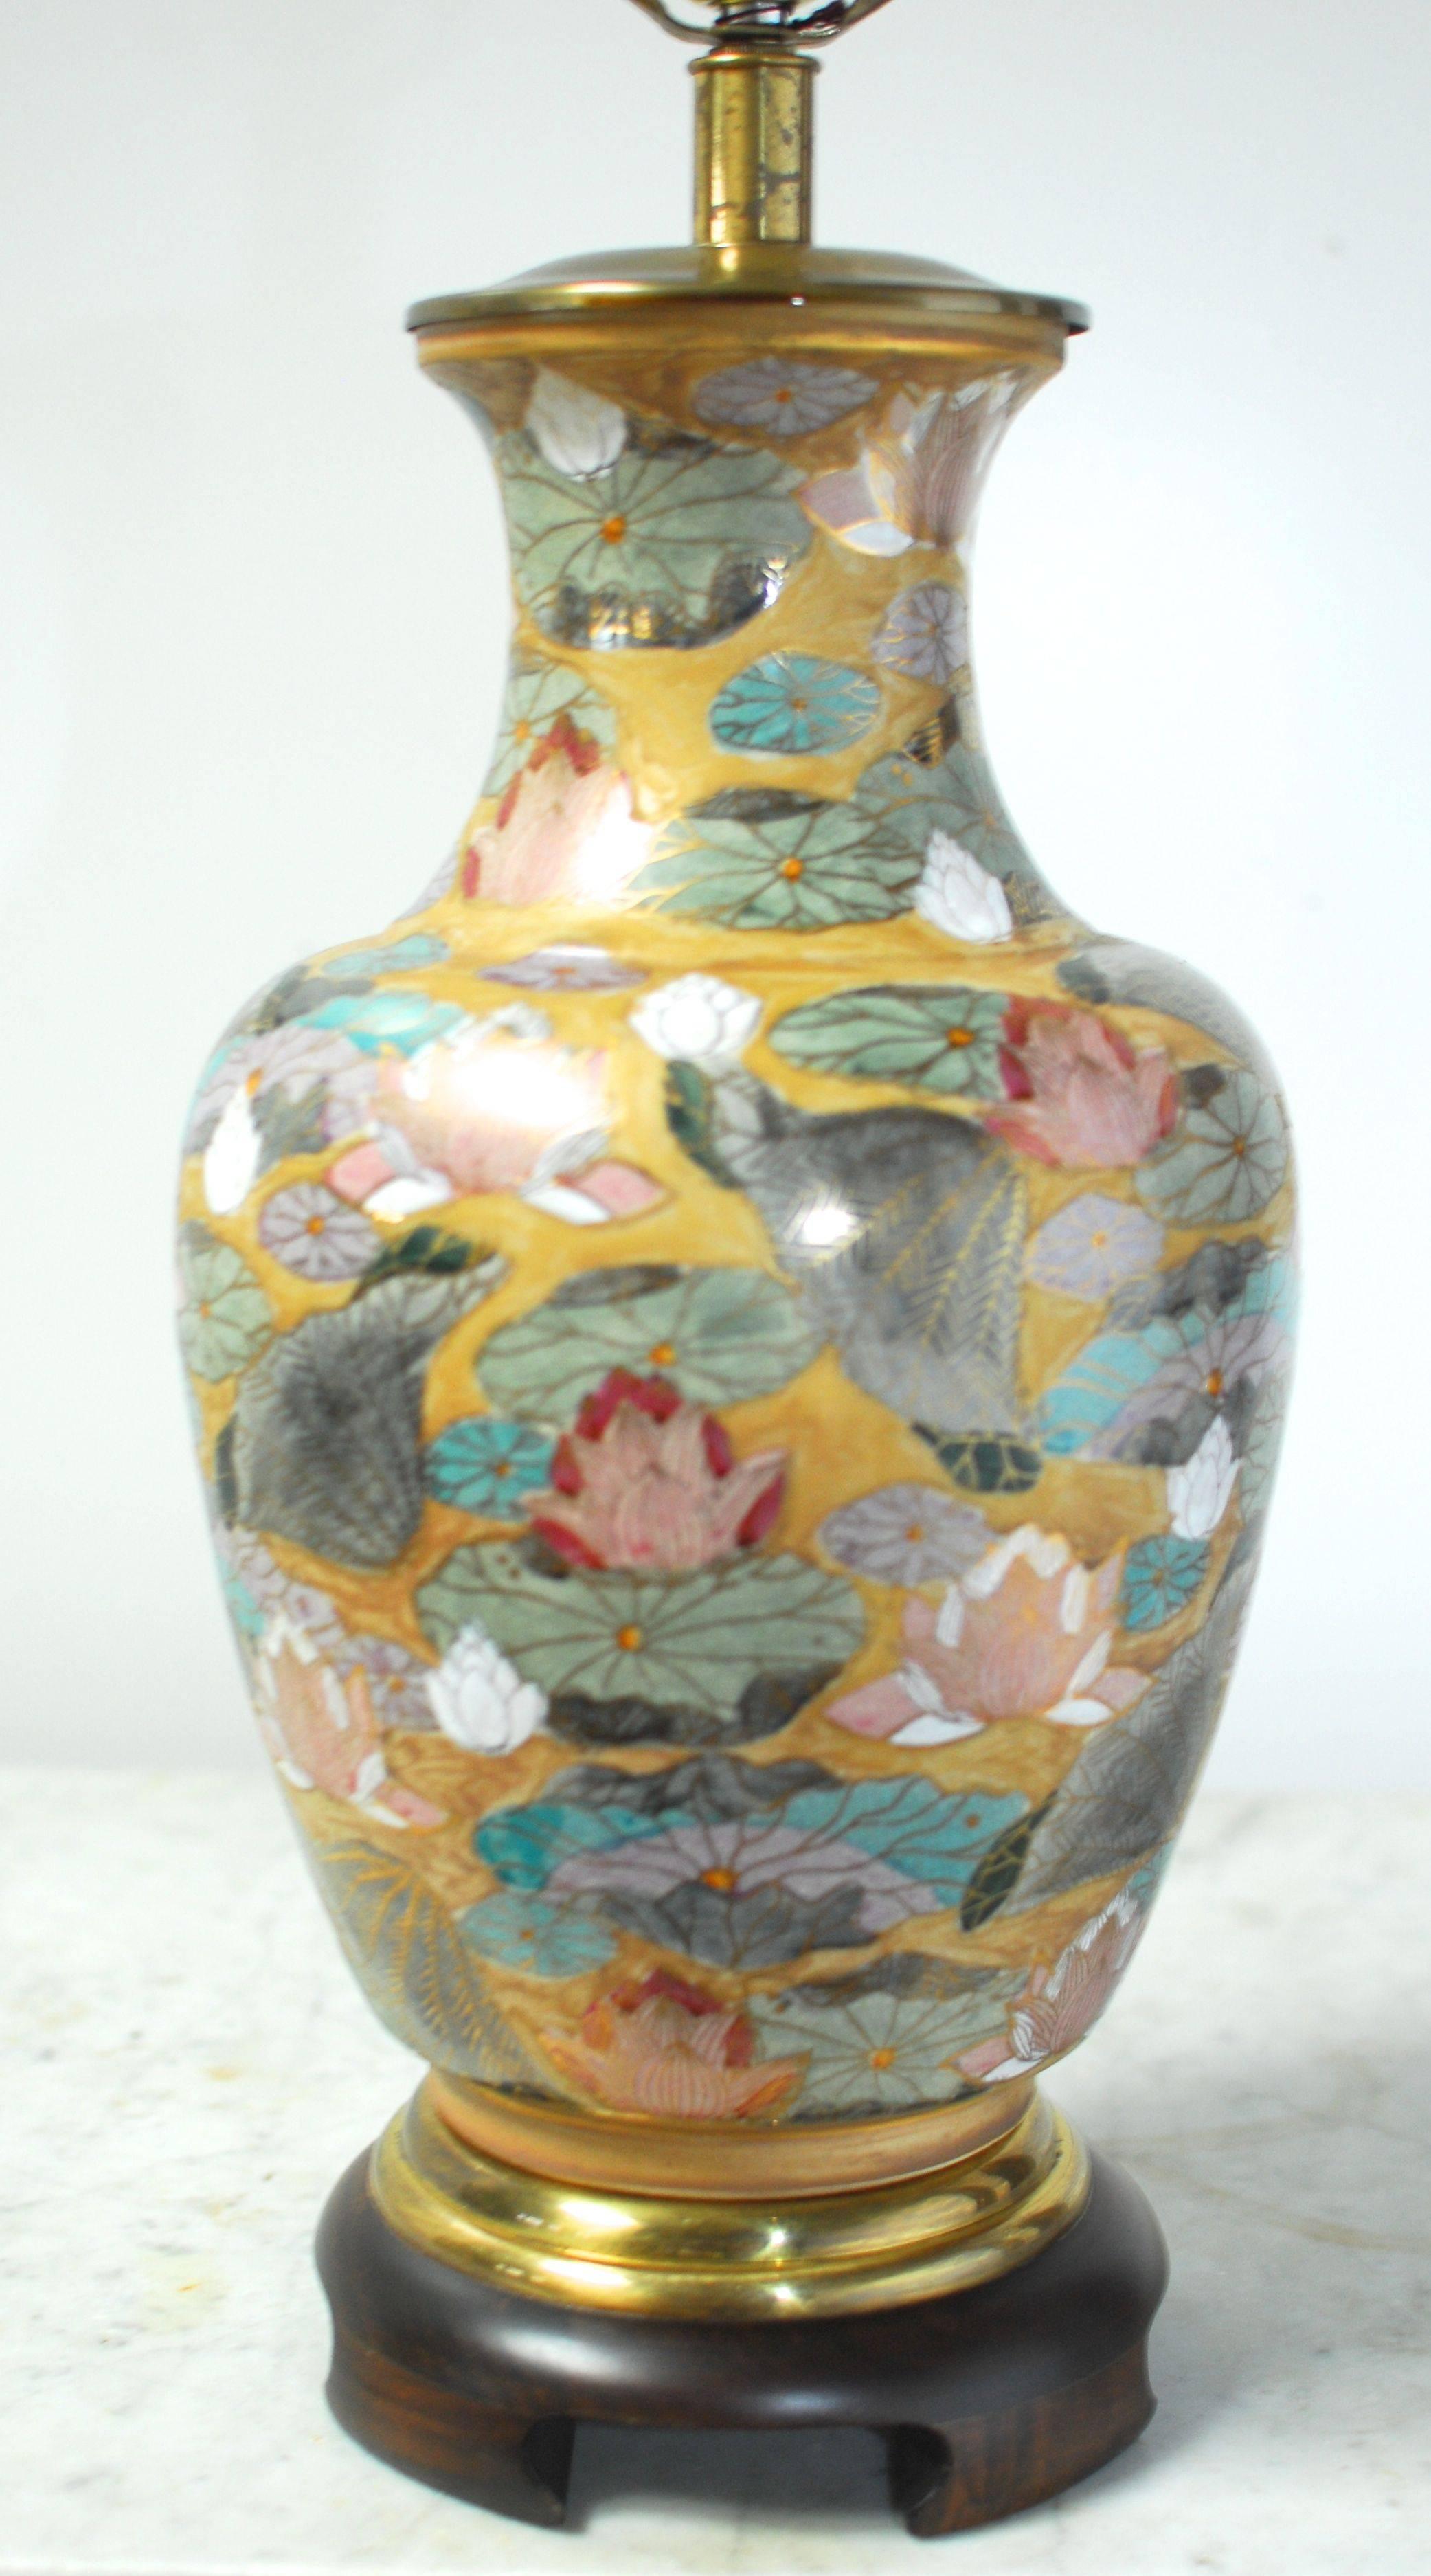 Asian style ginger jar form table lamp by Frederick Cooper of Chicago featuring a hand-painted gold leaf decorated vase with a colorful floral motif. Stands on a carved wooden base with a brass stand and brass hardware and lid. Includes an Asian